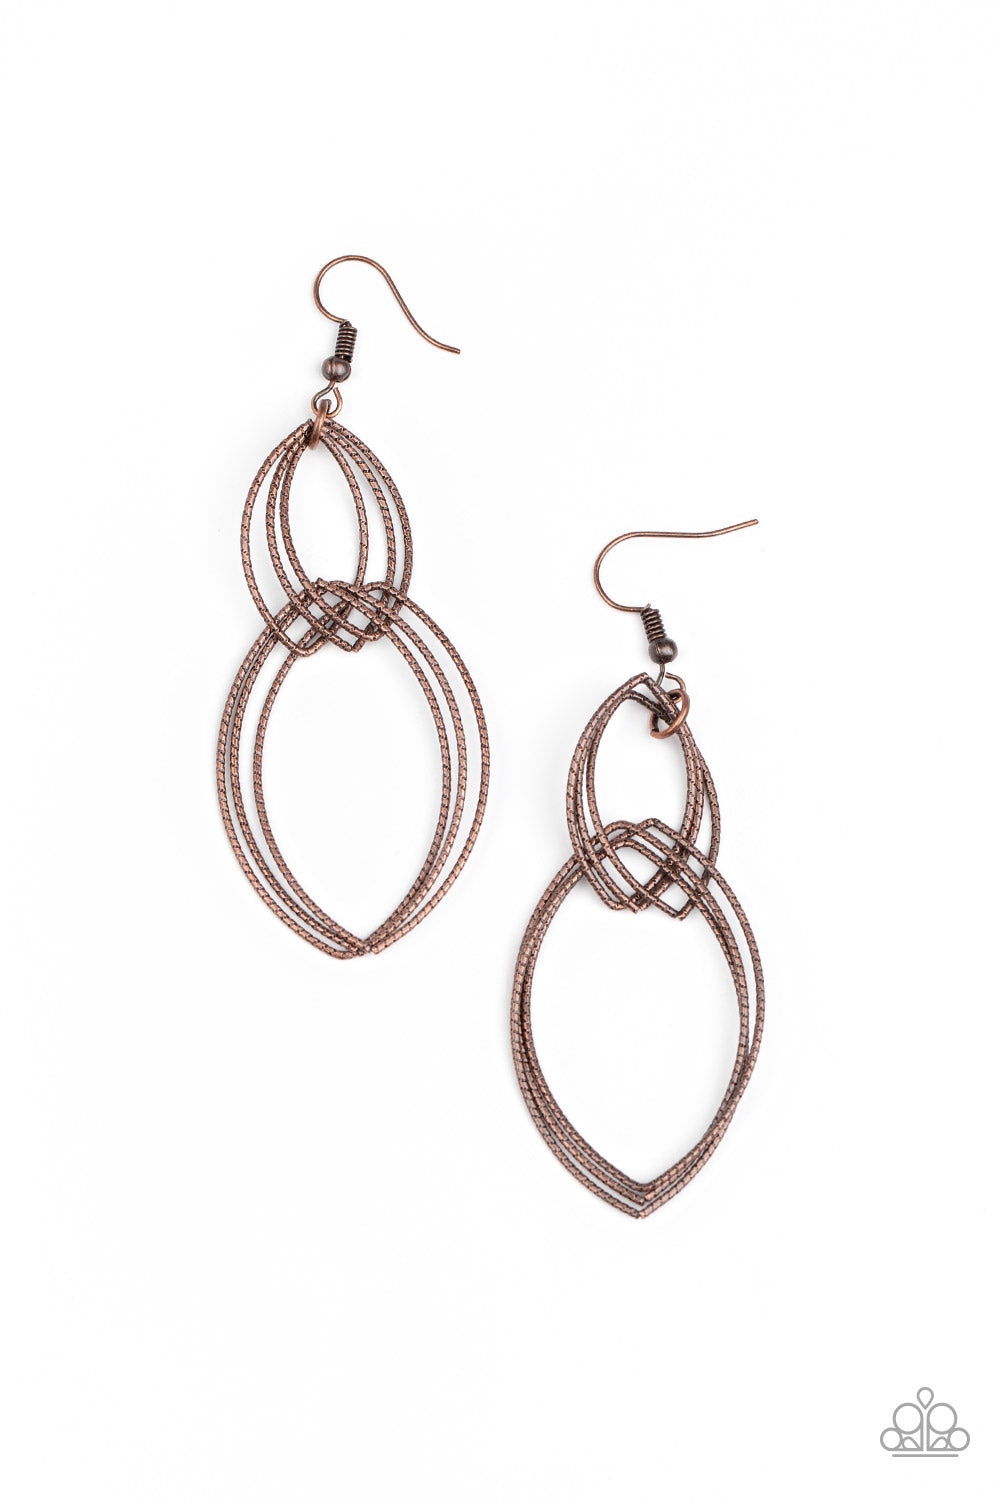 Trios of textured marquise-shaped copper frames link into an airy lure for a classic look. Earring attaches to a standard fishhook fitting.